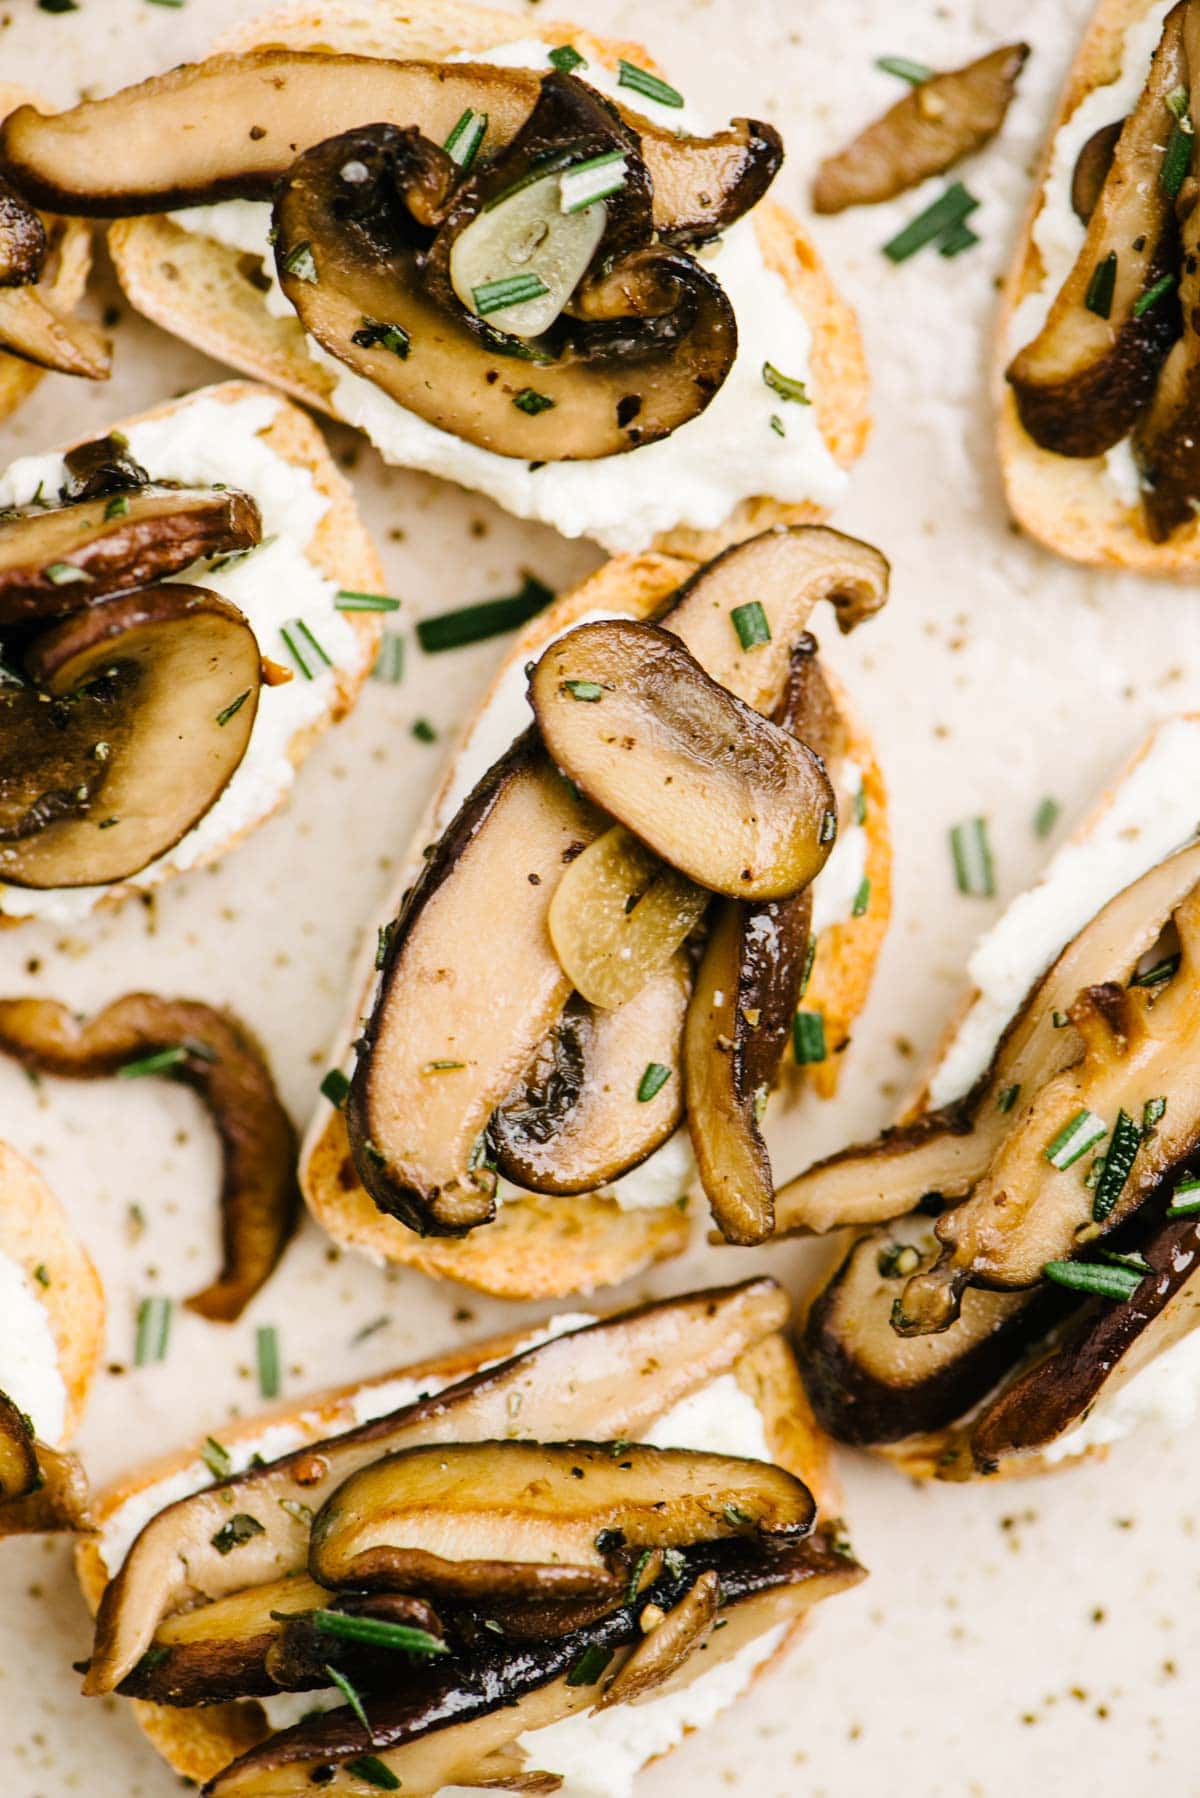 Several pieces of crostini topped with ricotta cheese and sautéed mushrooms on a speckled tan platter.